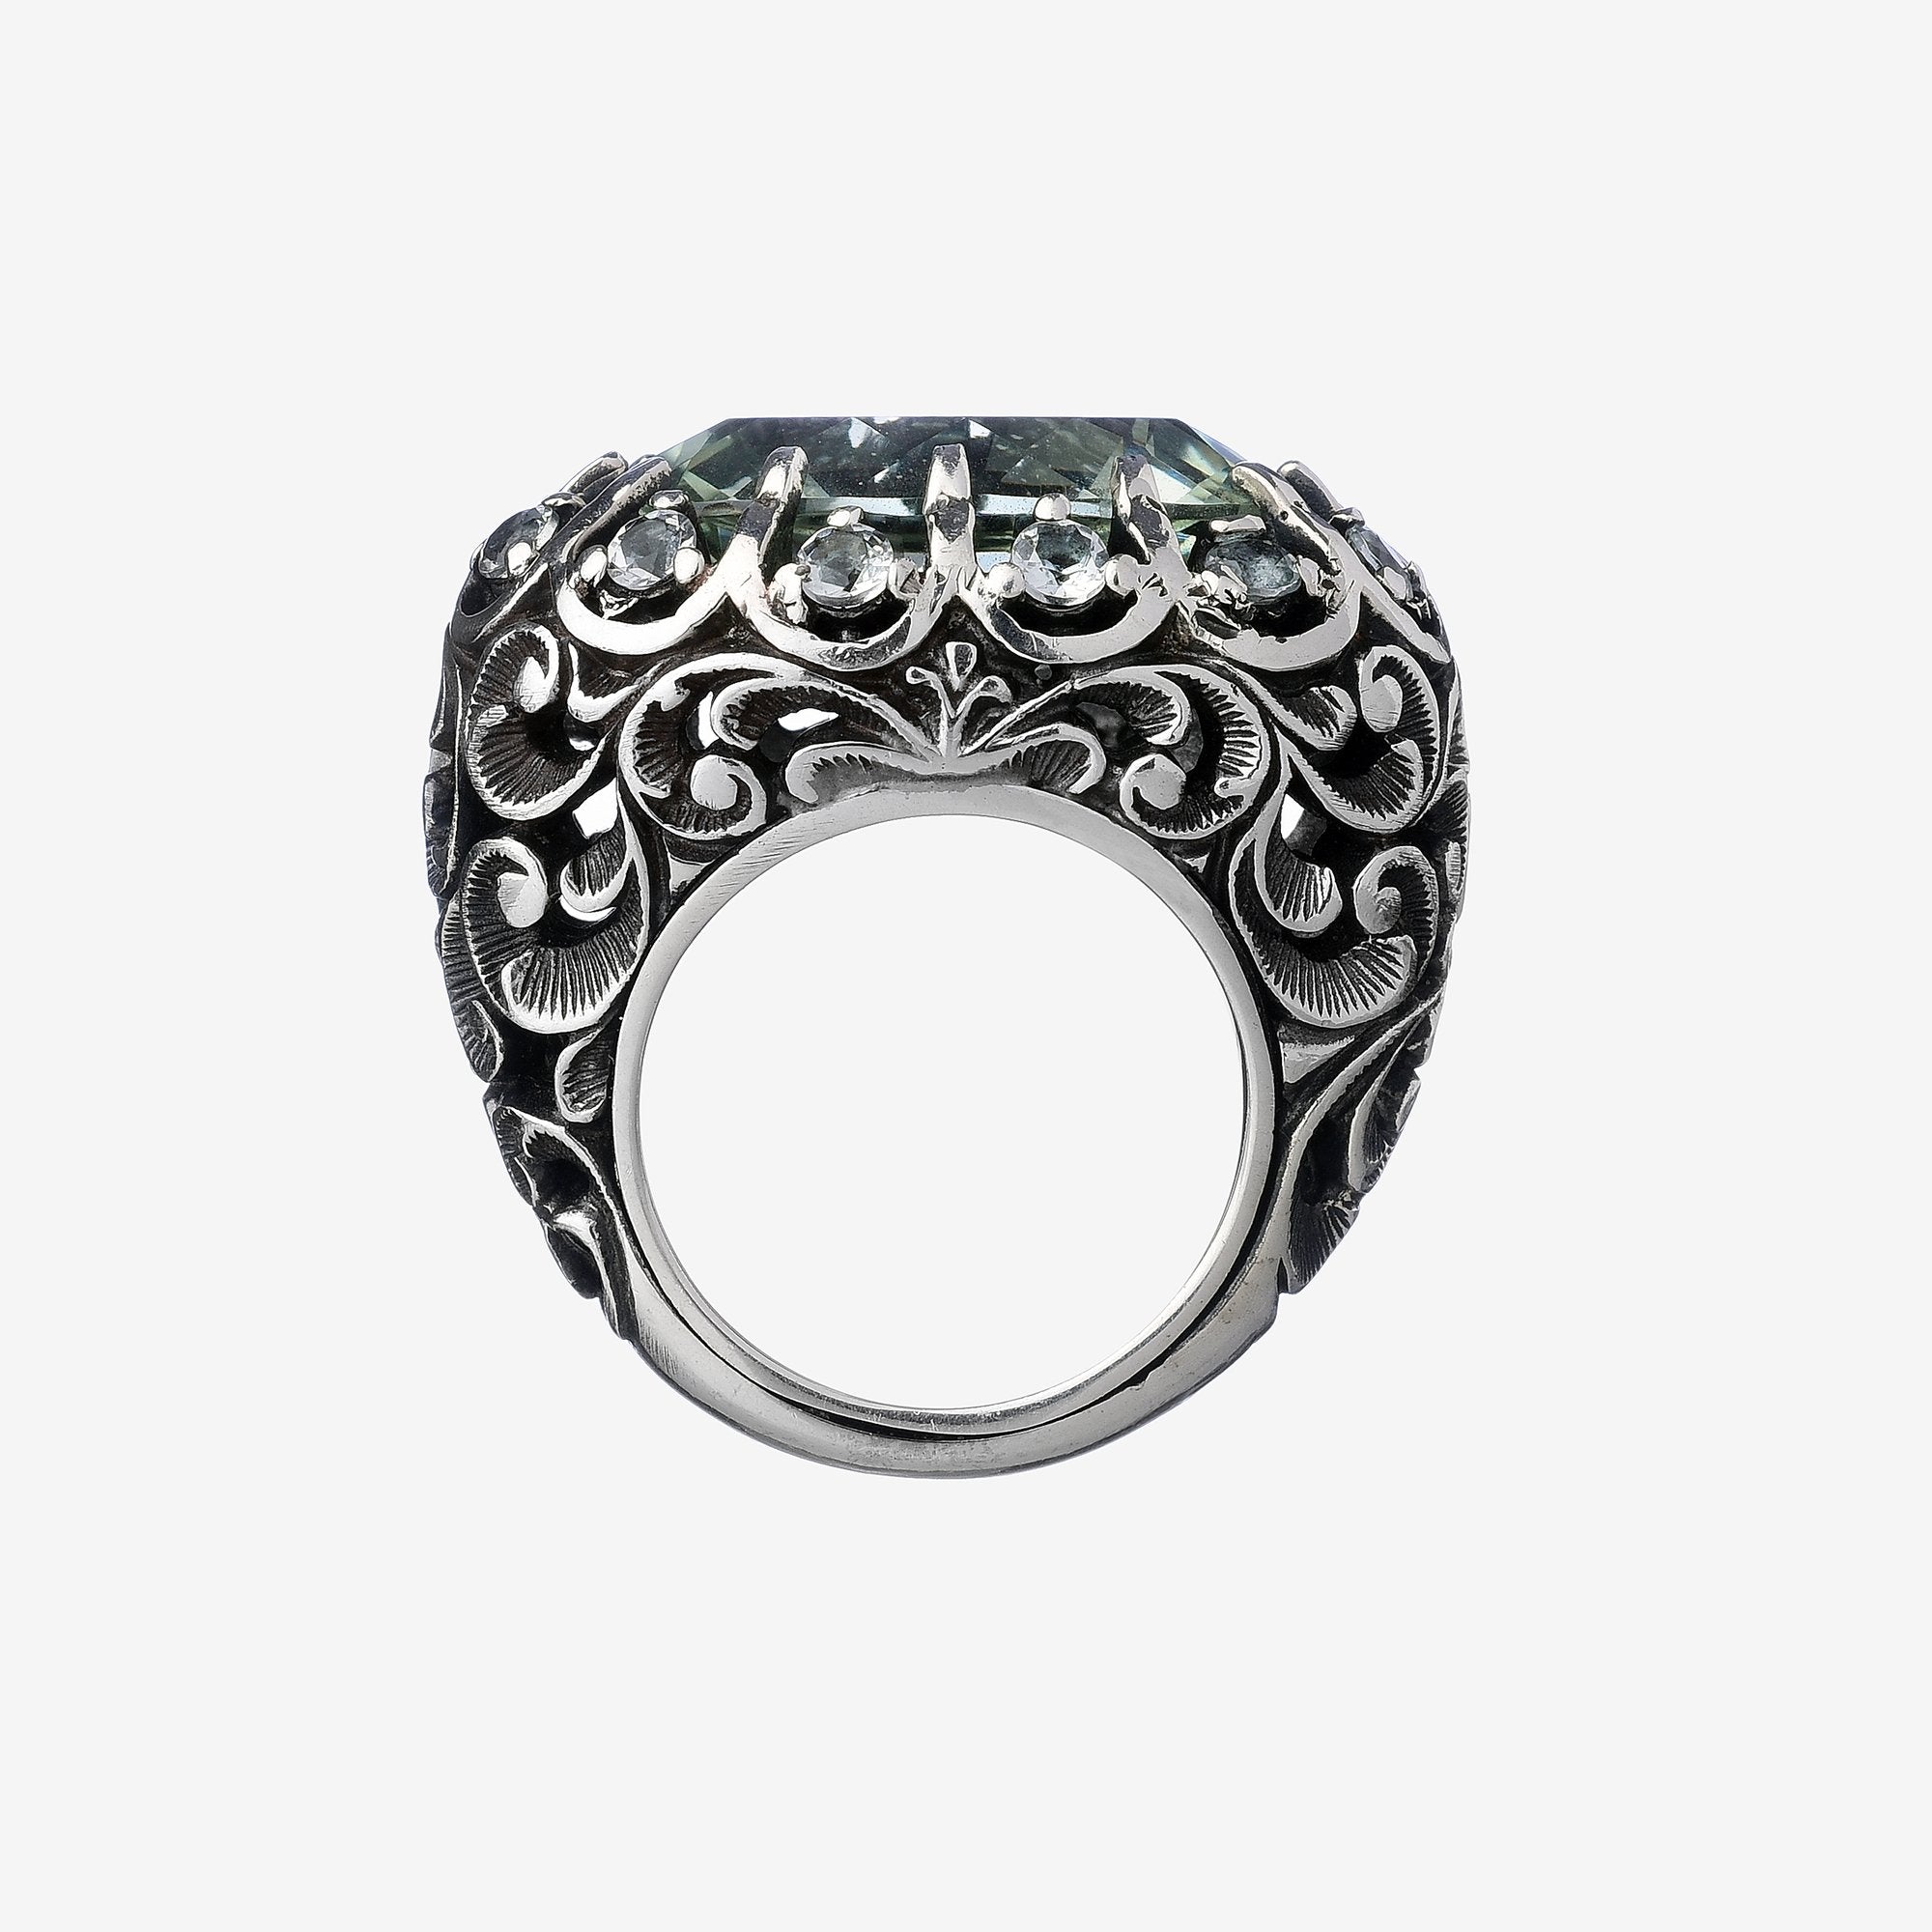 Ring with oval stone and crown stones